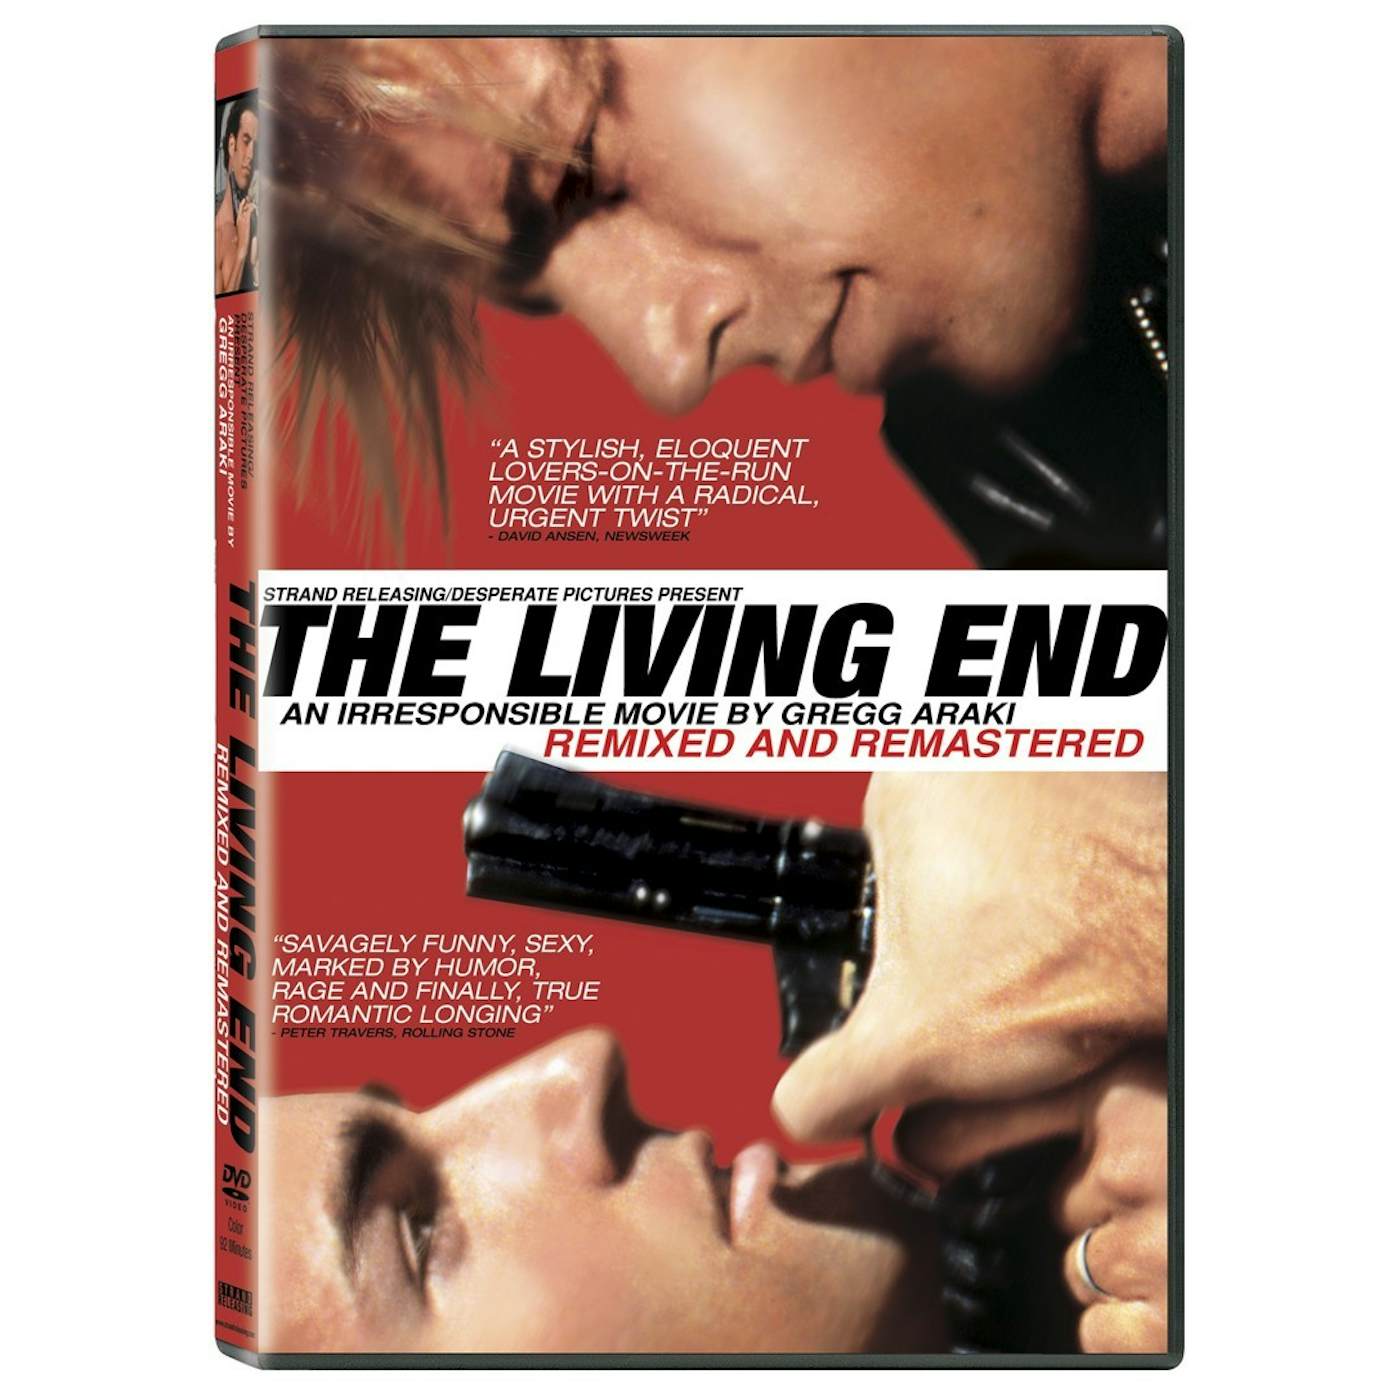 The Living End DVD